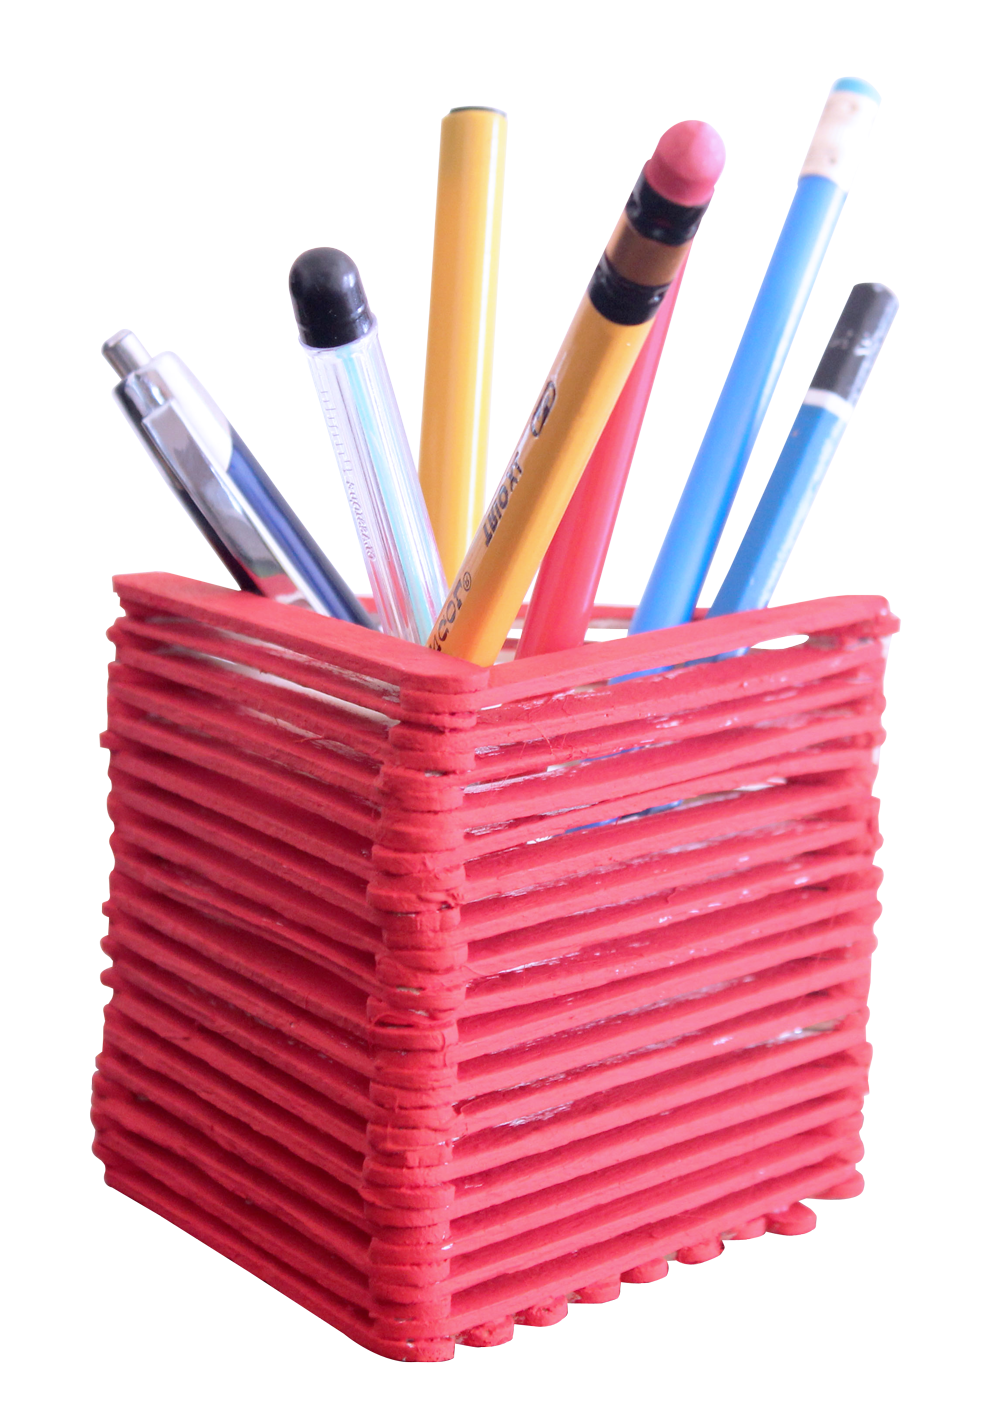 pen and pencil holder